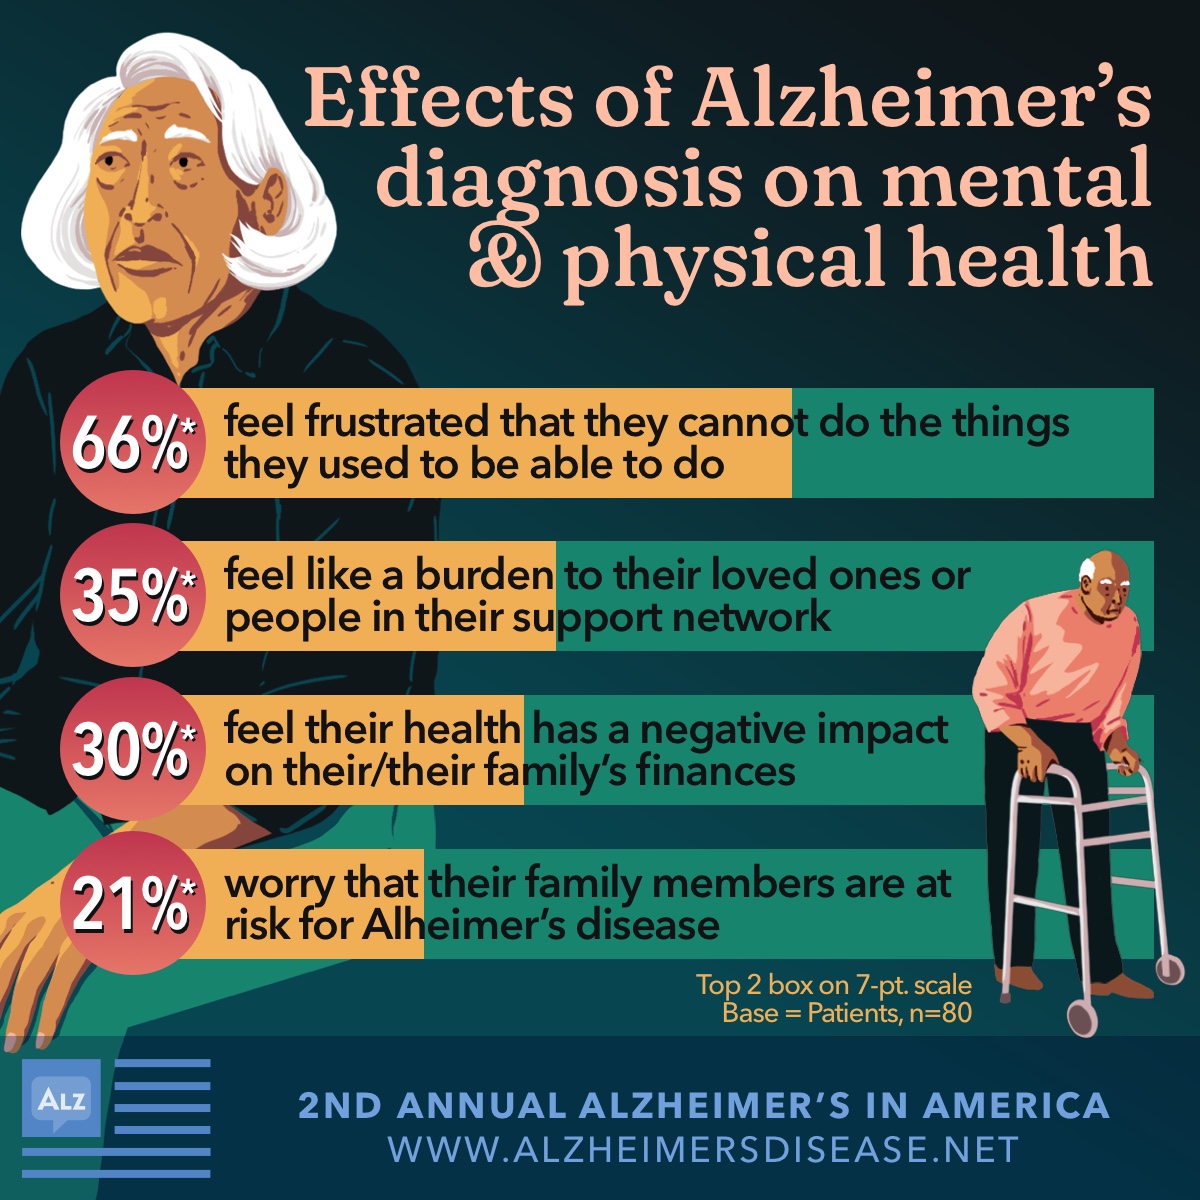 Effects of Alzheimer’s diagnosis on mental and physical health, including frustration about lost capabilities, and feeling like a burden to loved ones